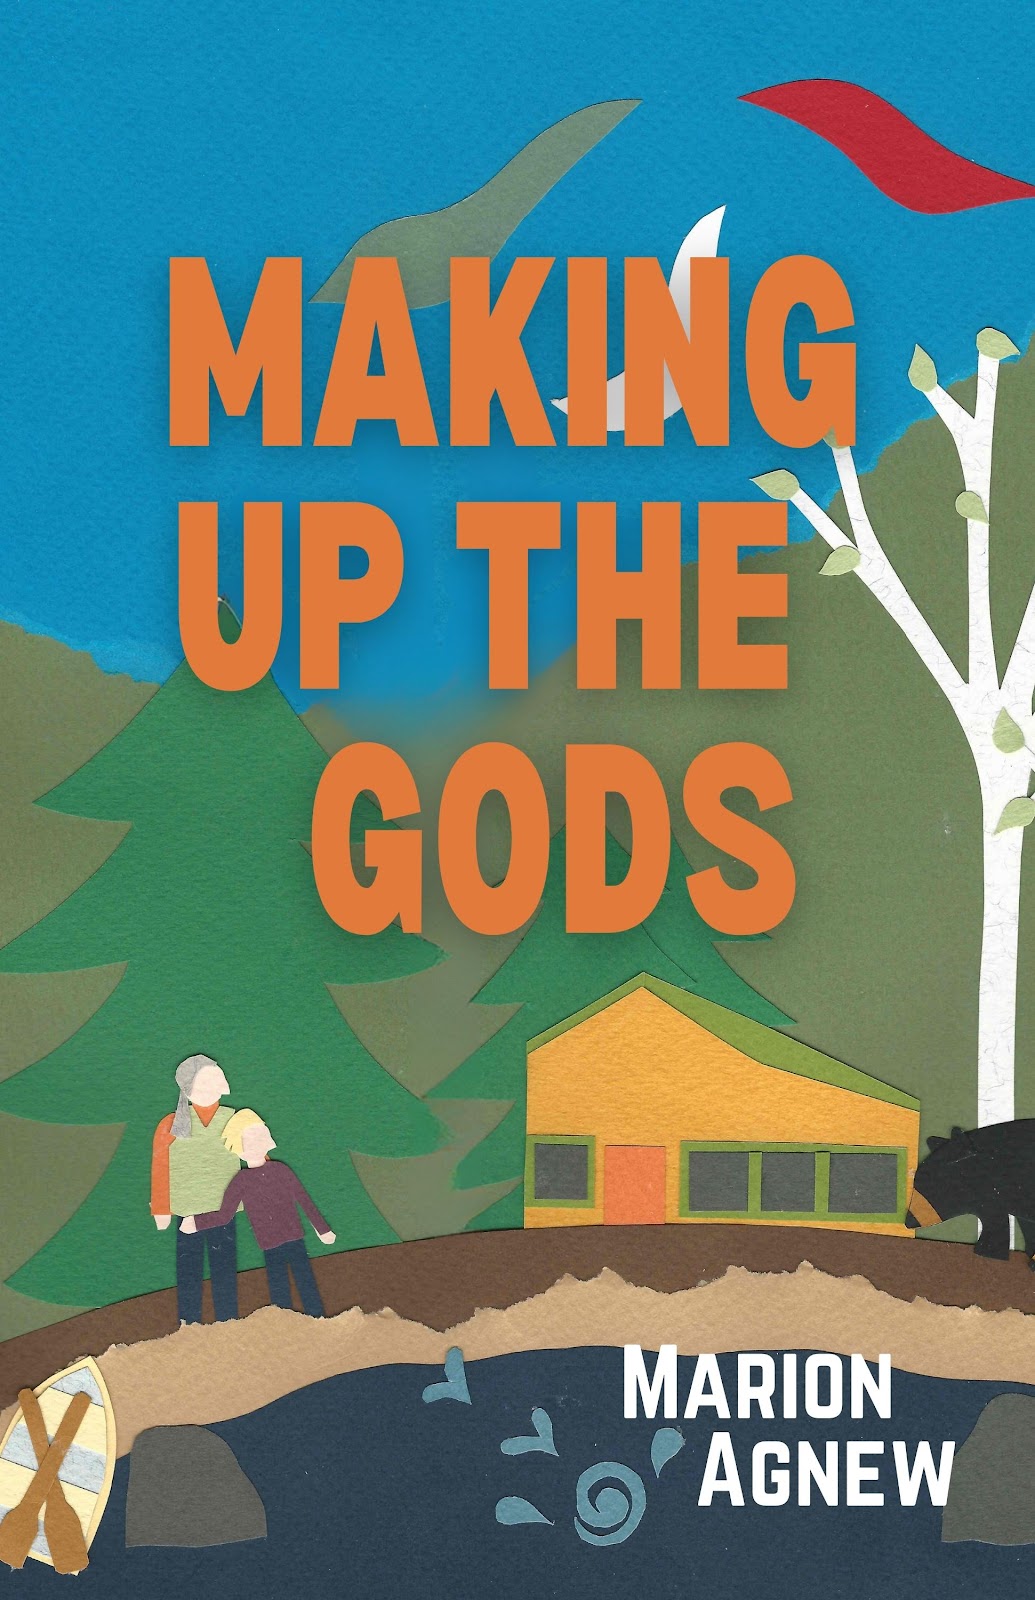 "Making Up The Gods" by Marion Agnew. Published by Latitude 46 Publishing on October 15, 2023. 